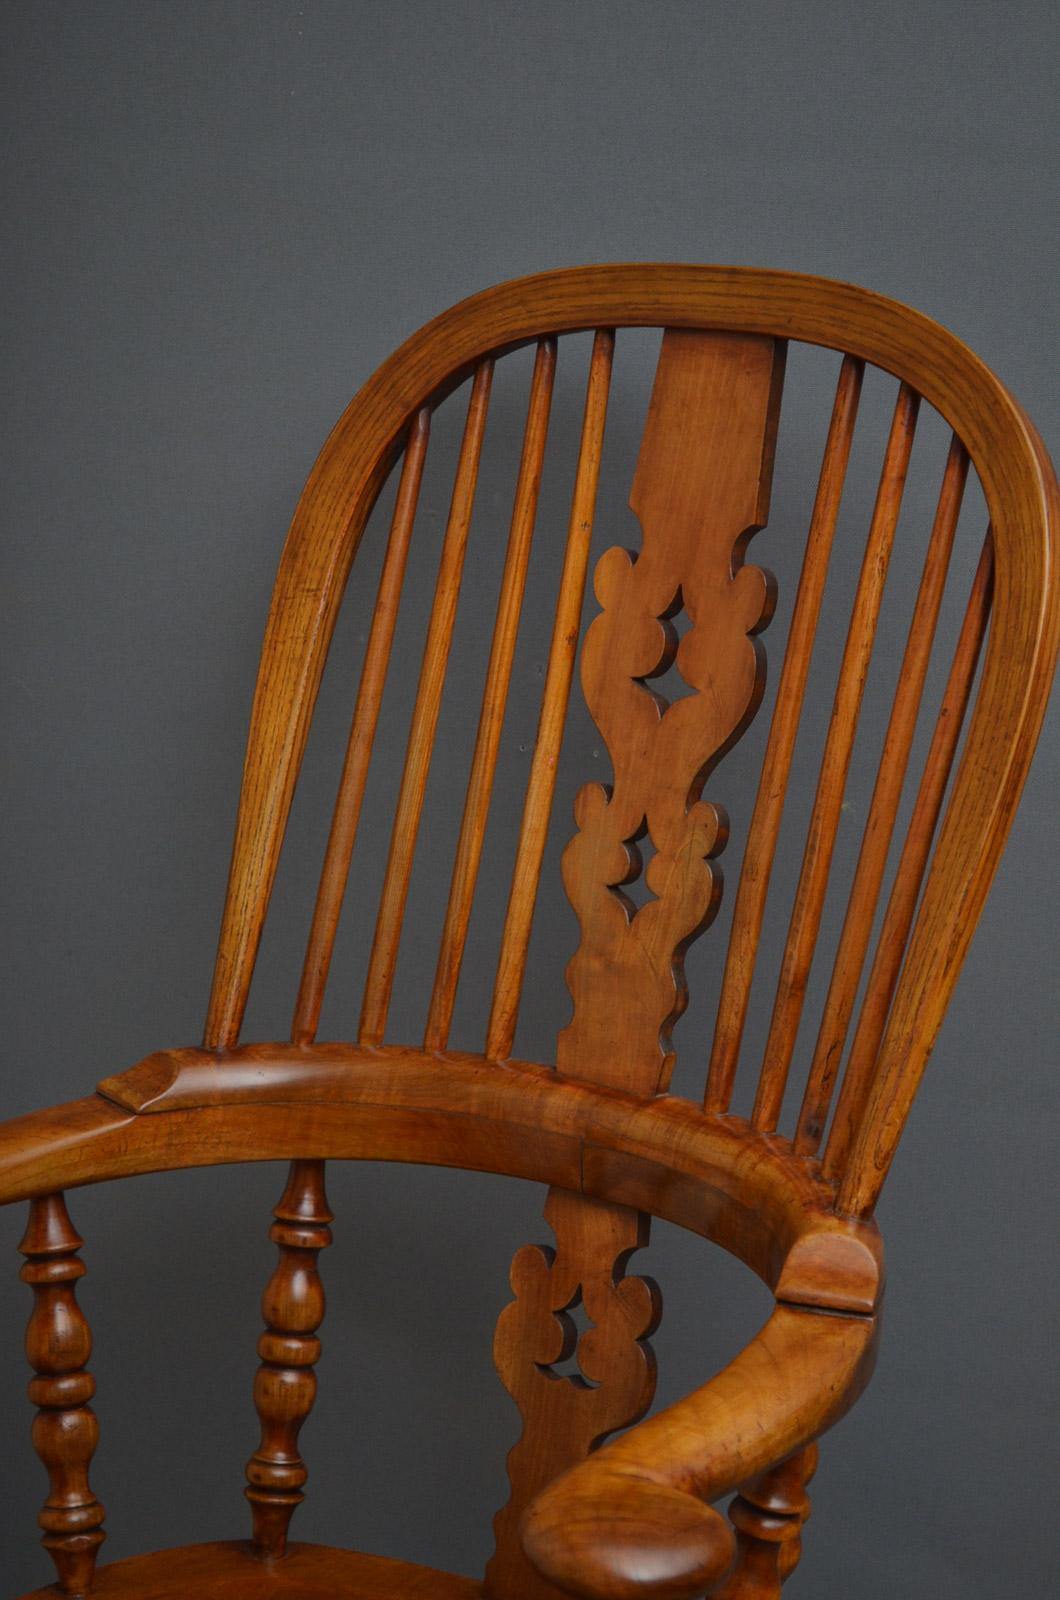 Sn2834 good quality early Victorian elm and ash pad arm Windsor chair with fretted central splat to back, standing on turned, ringed legs united with H stretchers. All in excellent condition, ready to place at home, circa 1850.
Measure: H 17